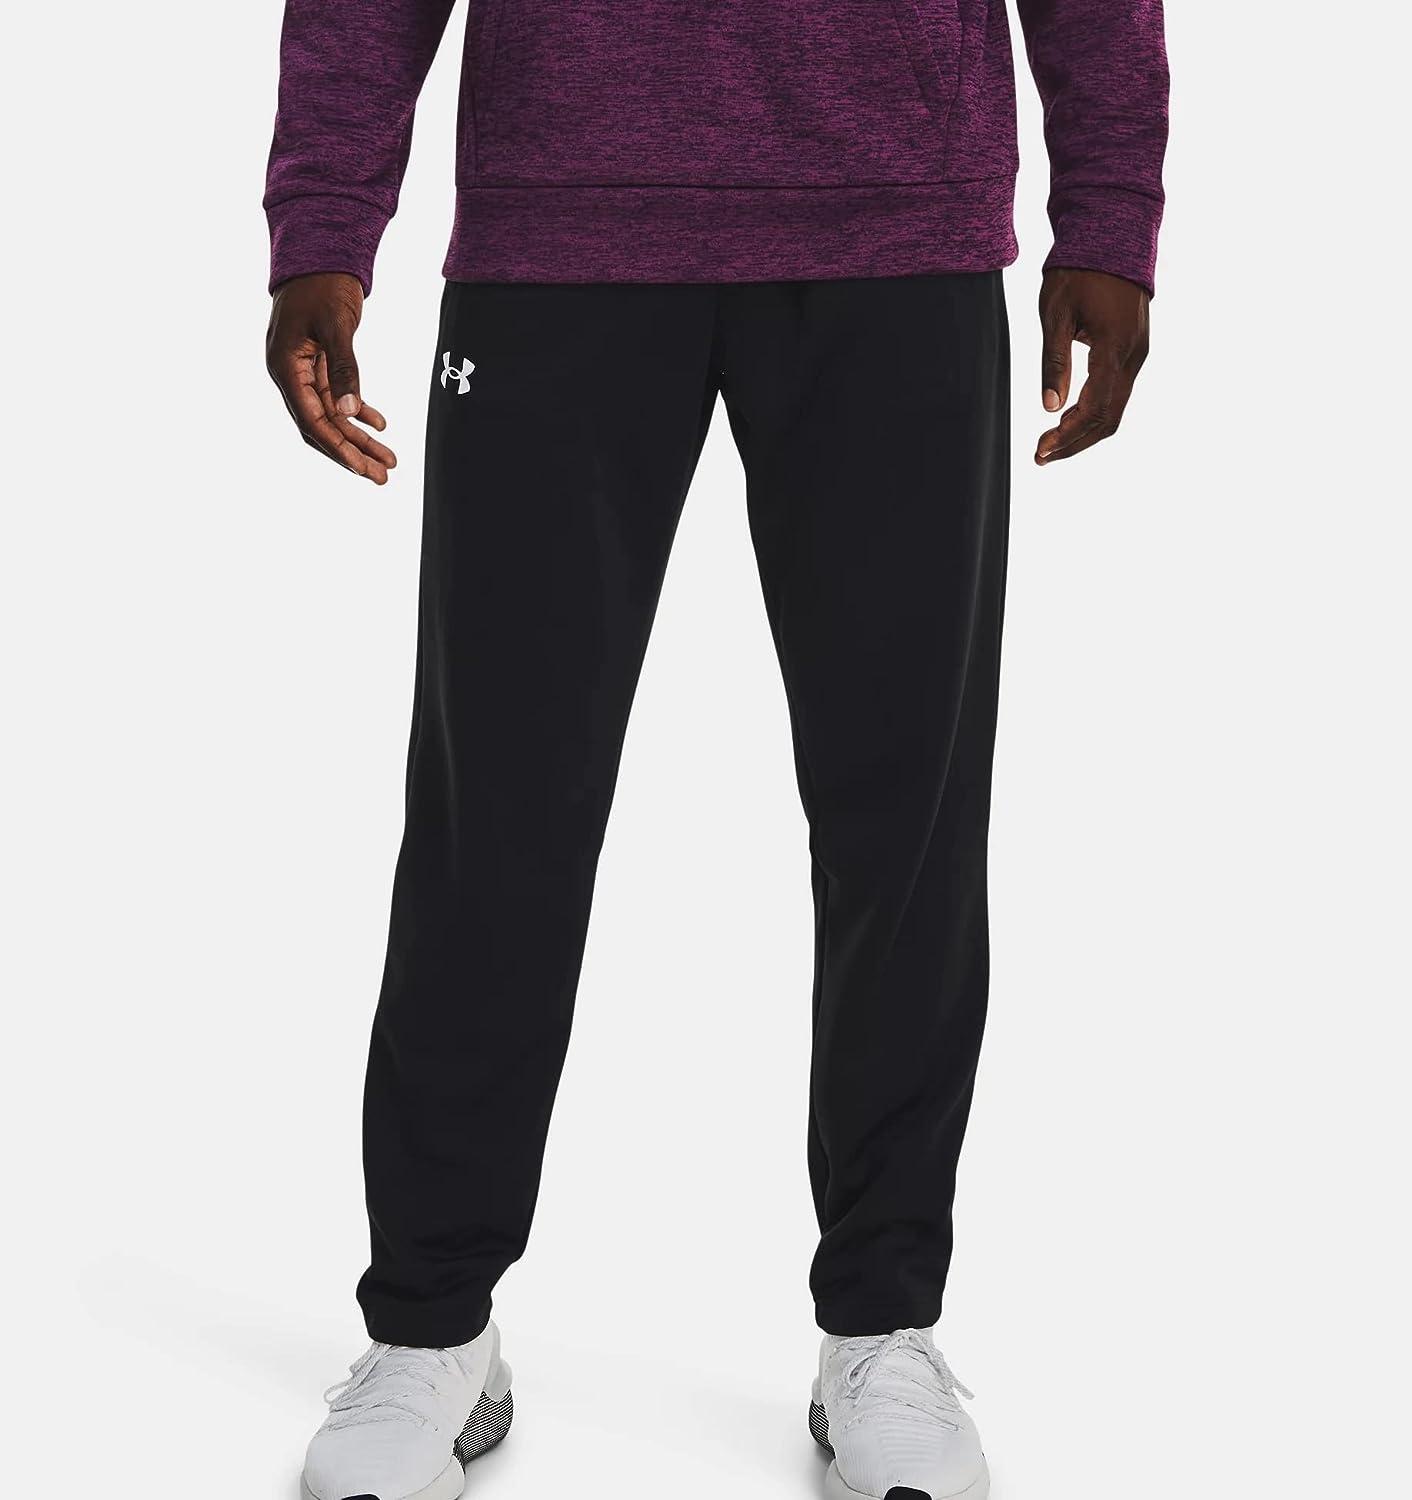 Men's Gym & Sports Trousers | Athletic Bottoms | Under Armour